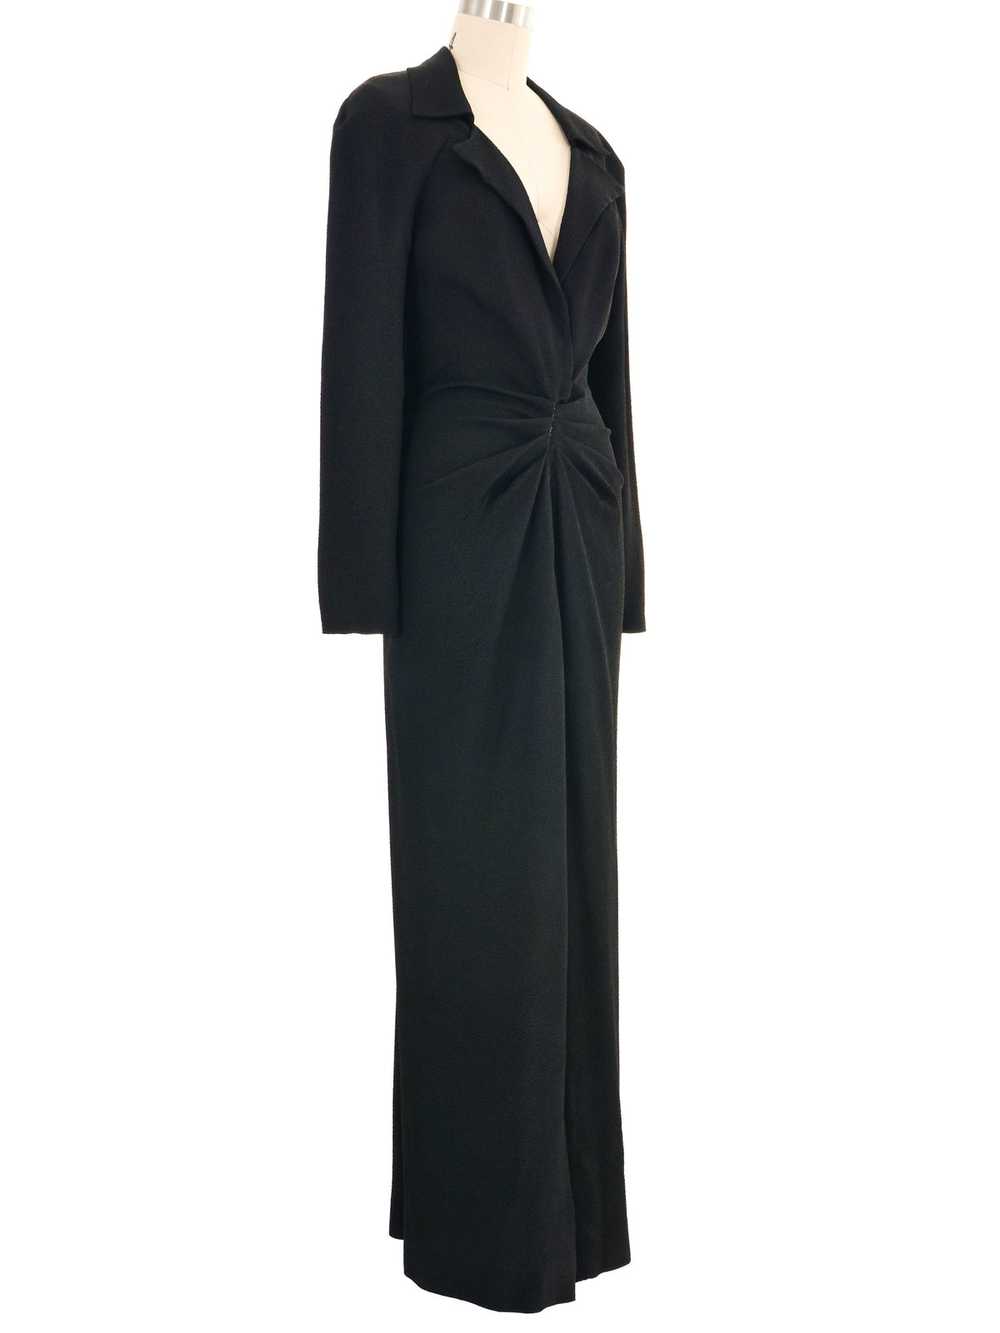 Chloe Black Crepe Ruched Front Gown - image 3